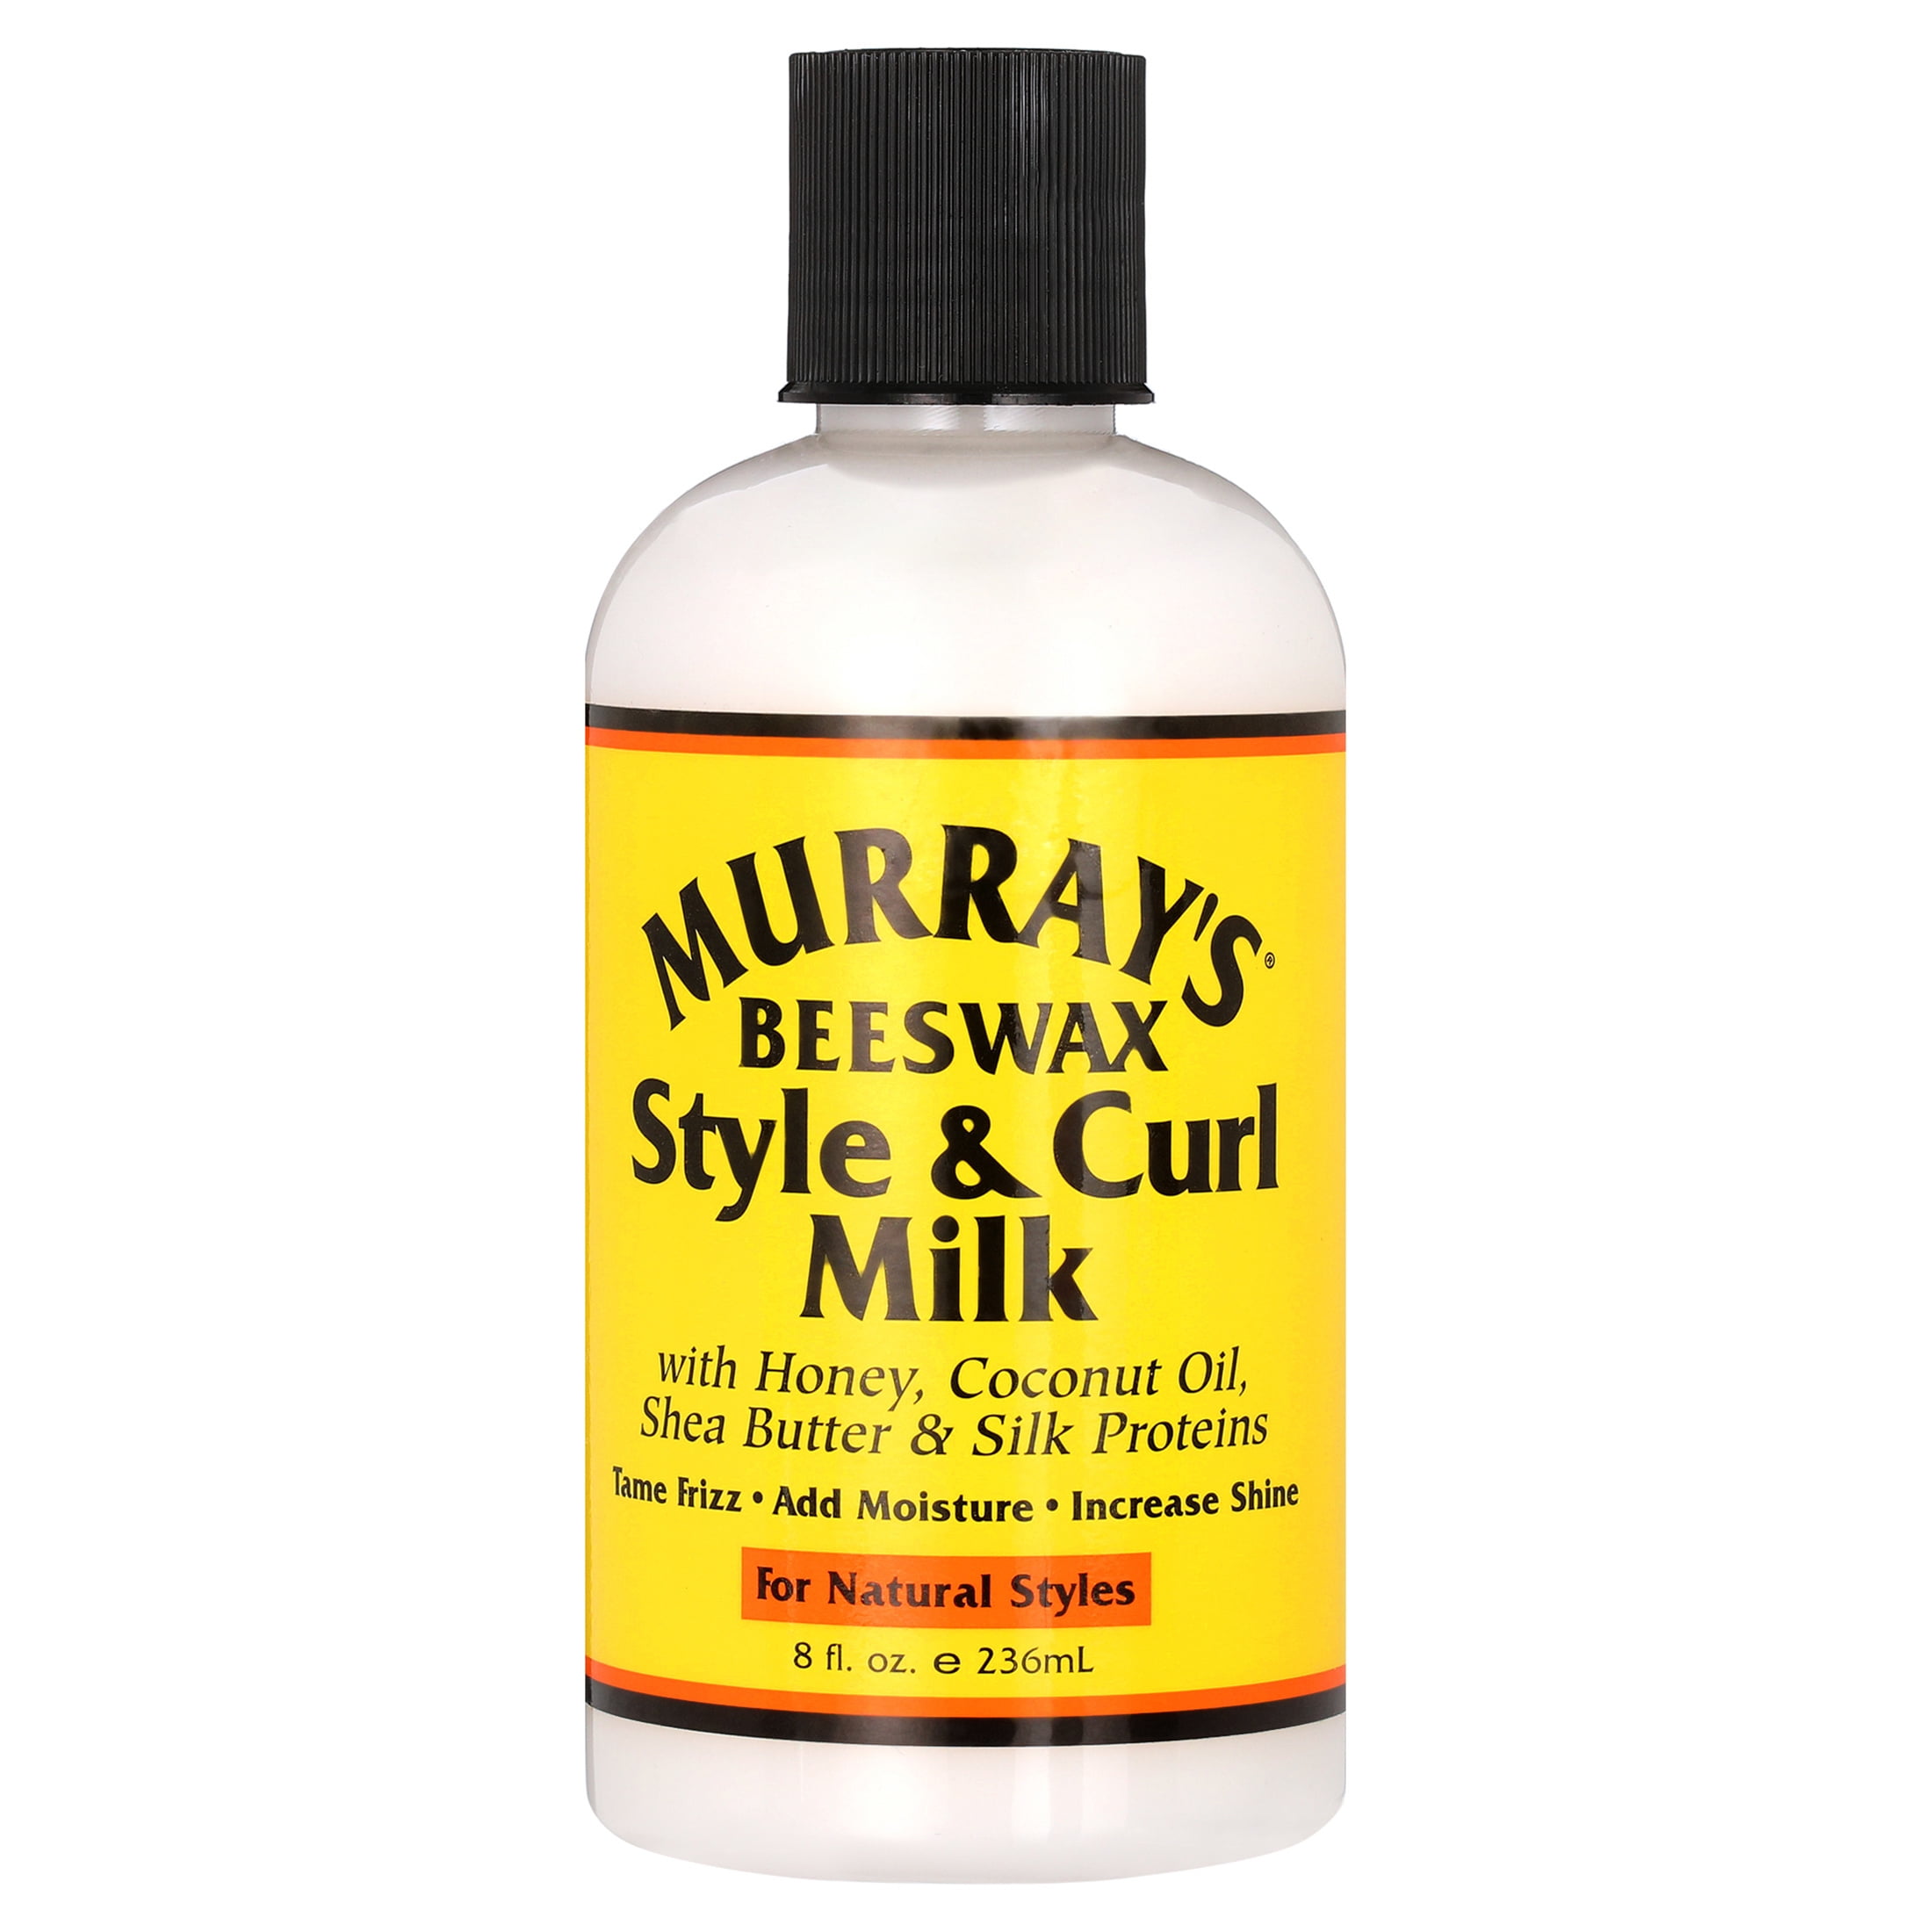 Murray's 4 Naturals: Beeswax, Style & Curl Milk and Honey Whip Curl  Enhancer.